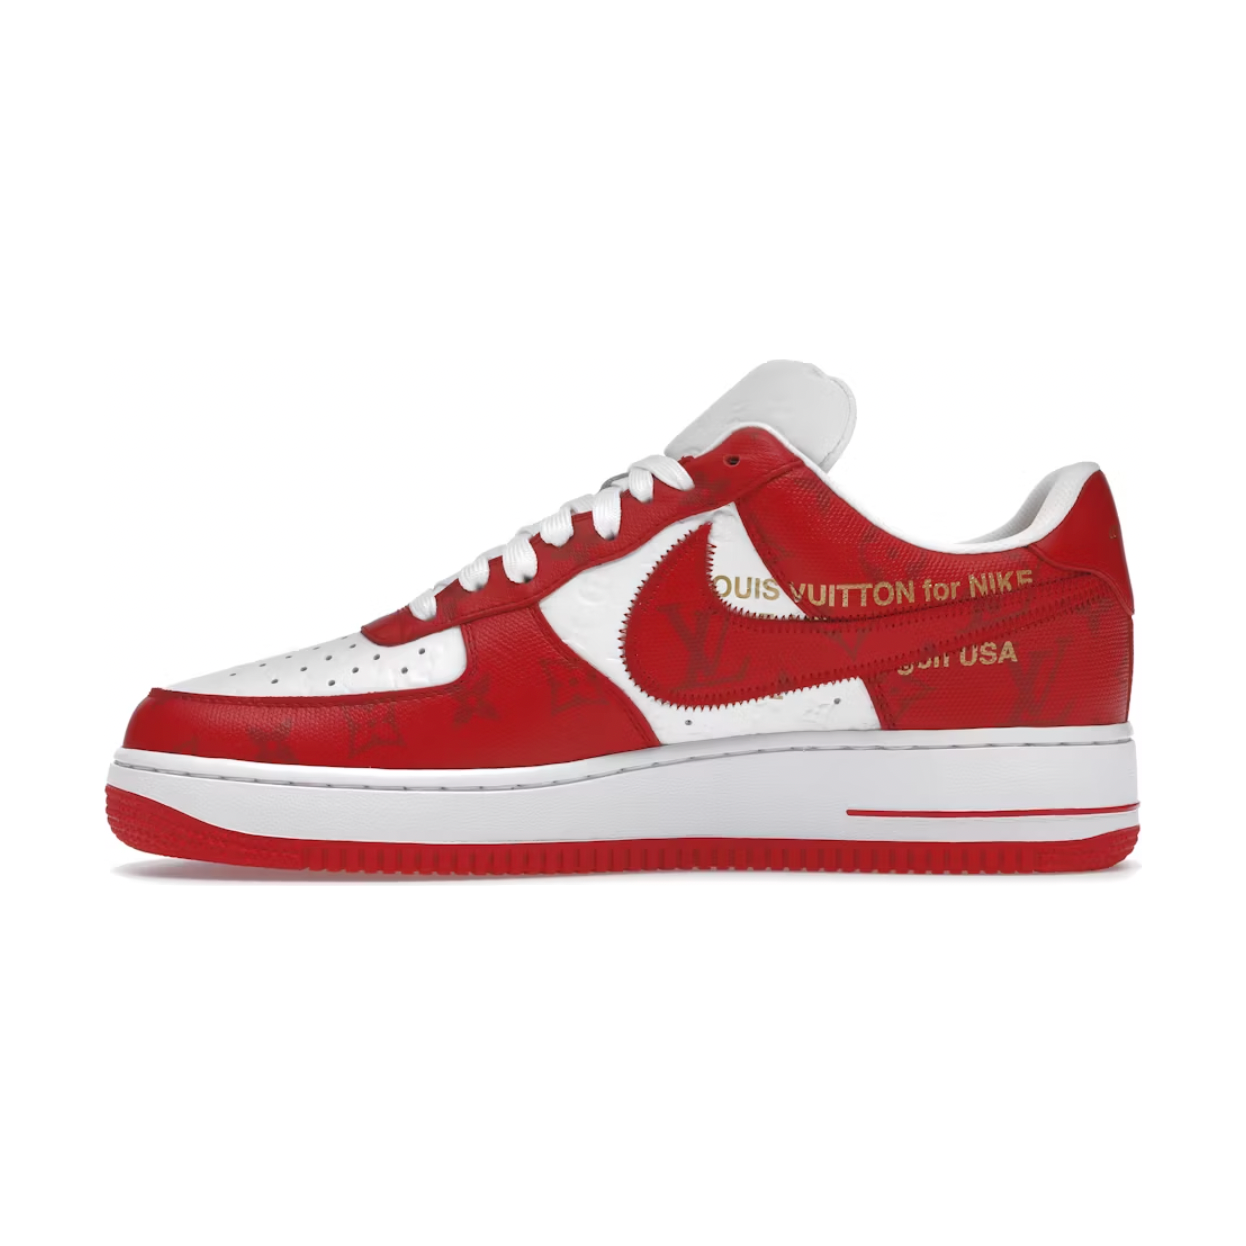 Louis Vuitton Nike Air Force 1 Low By Virgil Abloh White Red | Louis ...